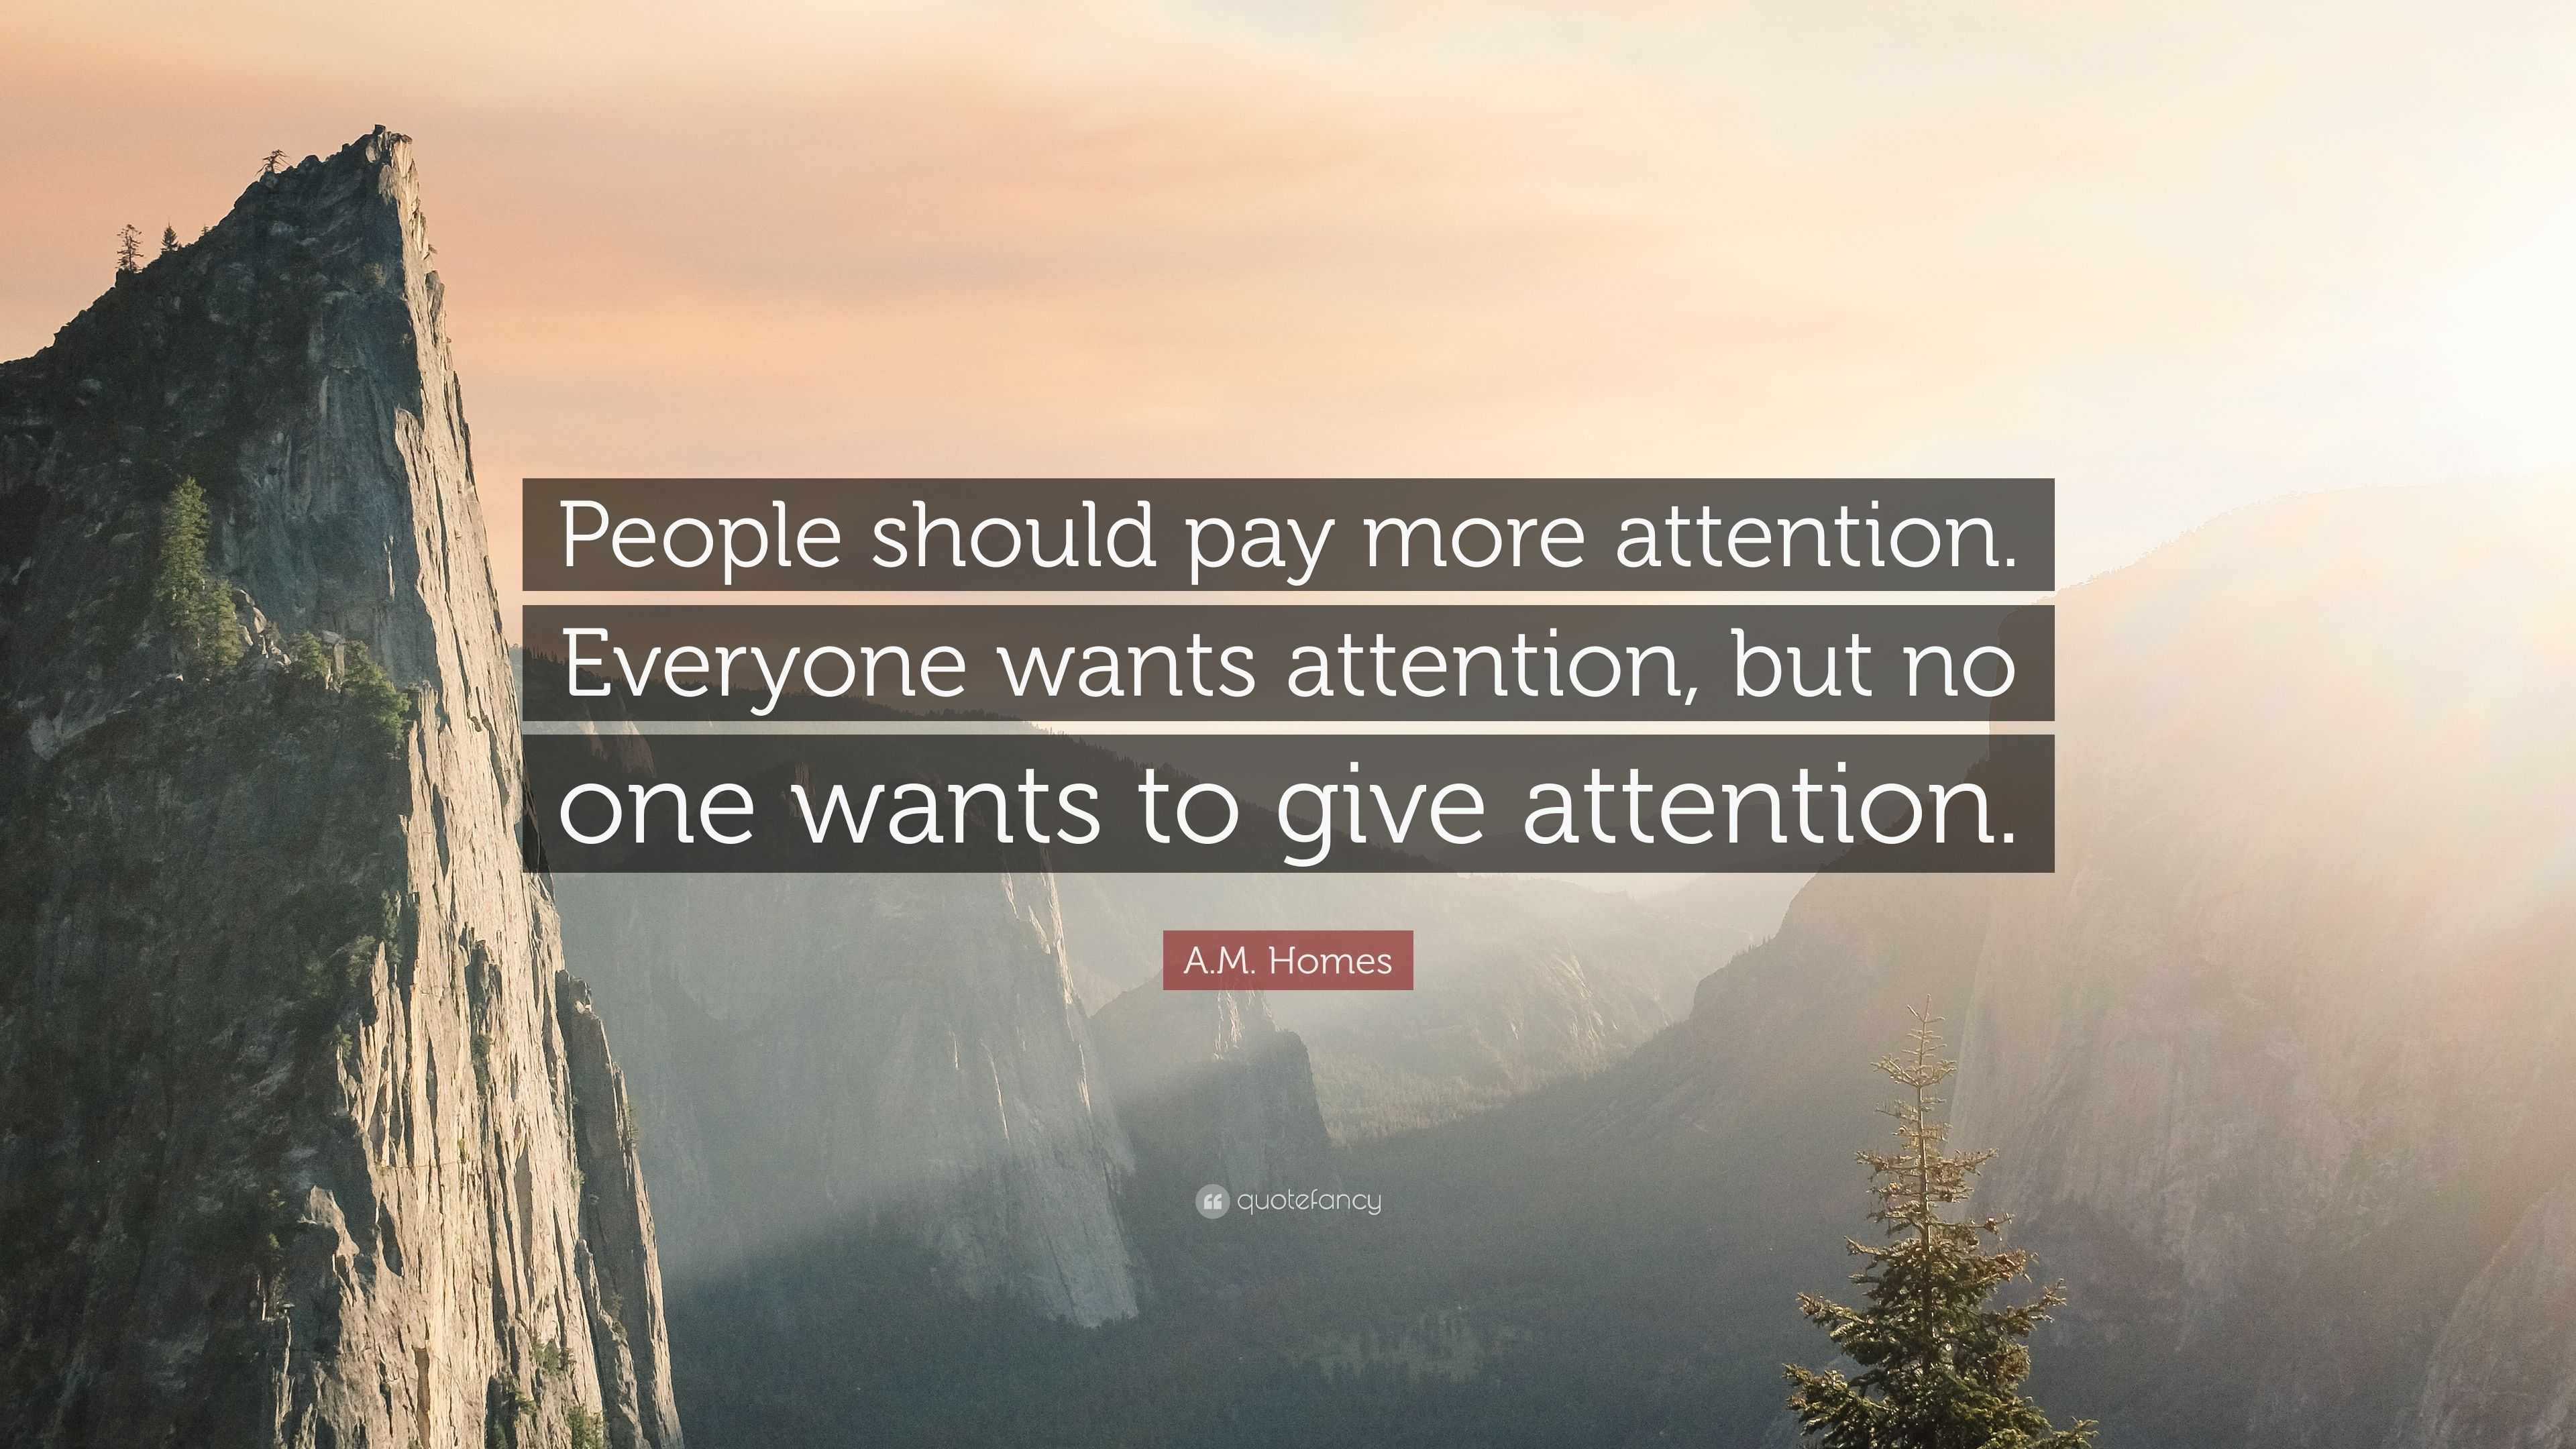 A.M. Homes Quote: “People should pay more attention. Everyone wants ...
